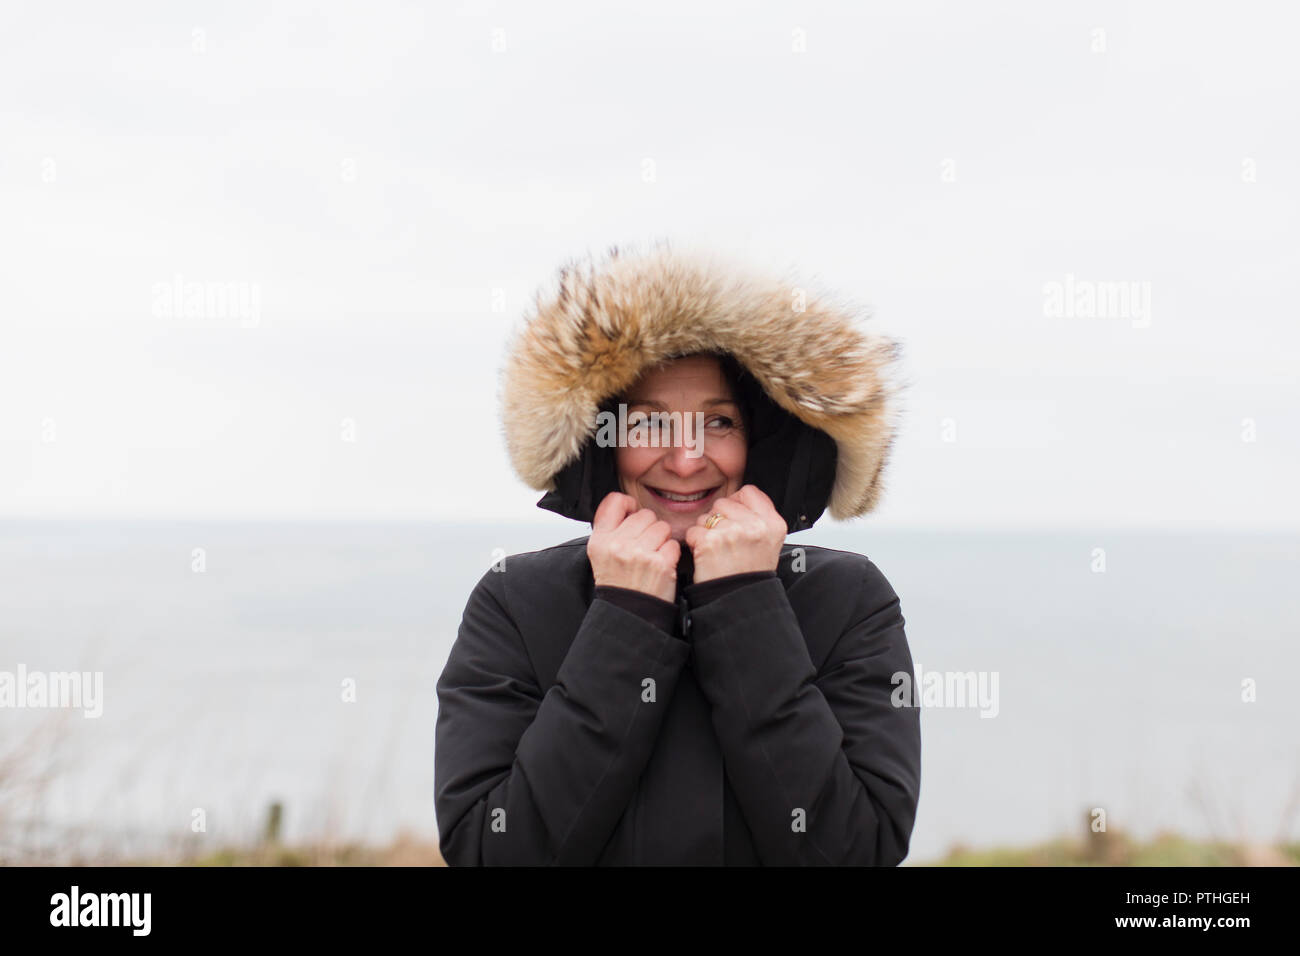 Portrait smiling woman in coat with fur hood Stock Photo